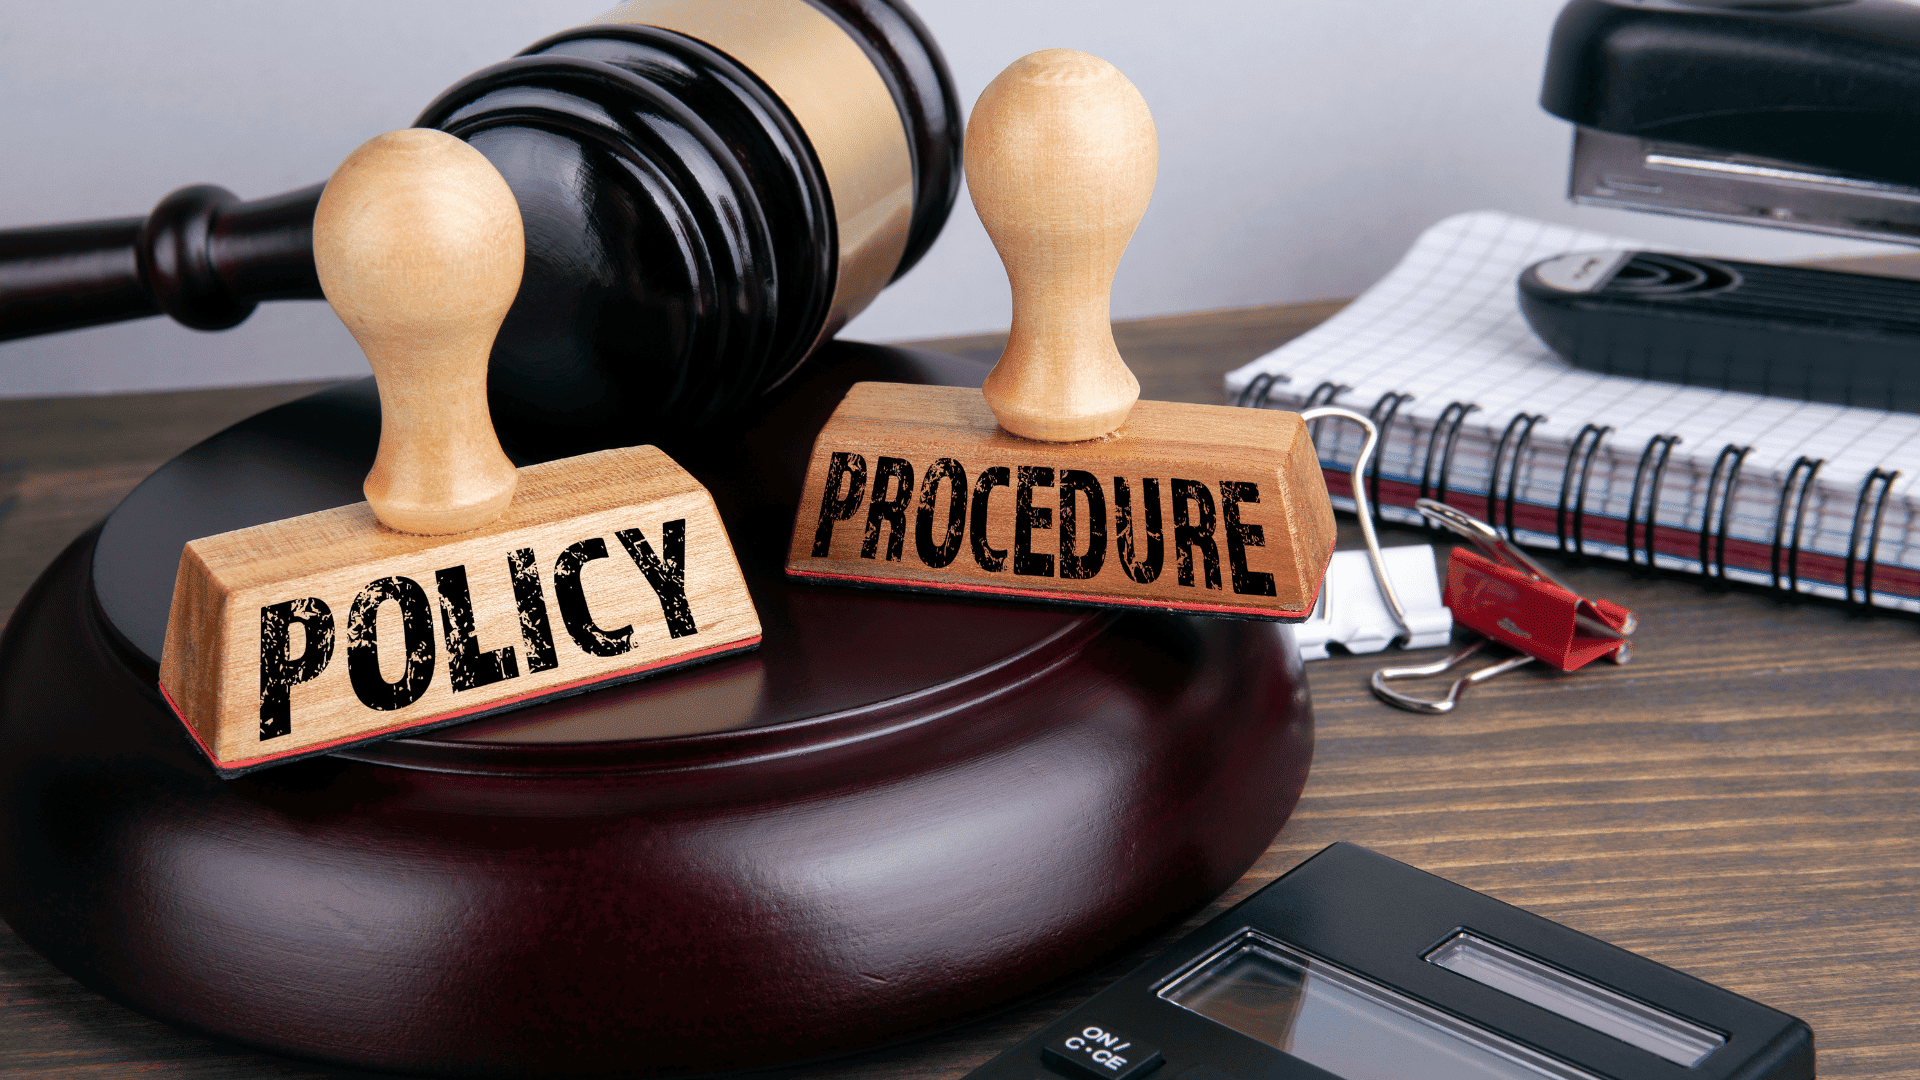 HR Policies And Procedures: A Step-by-Step Guide To Developing Good HR Policies And Procedures